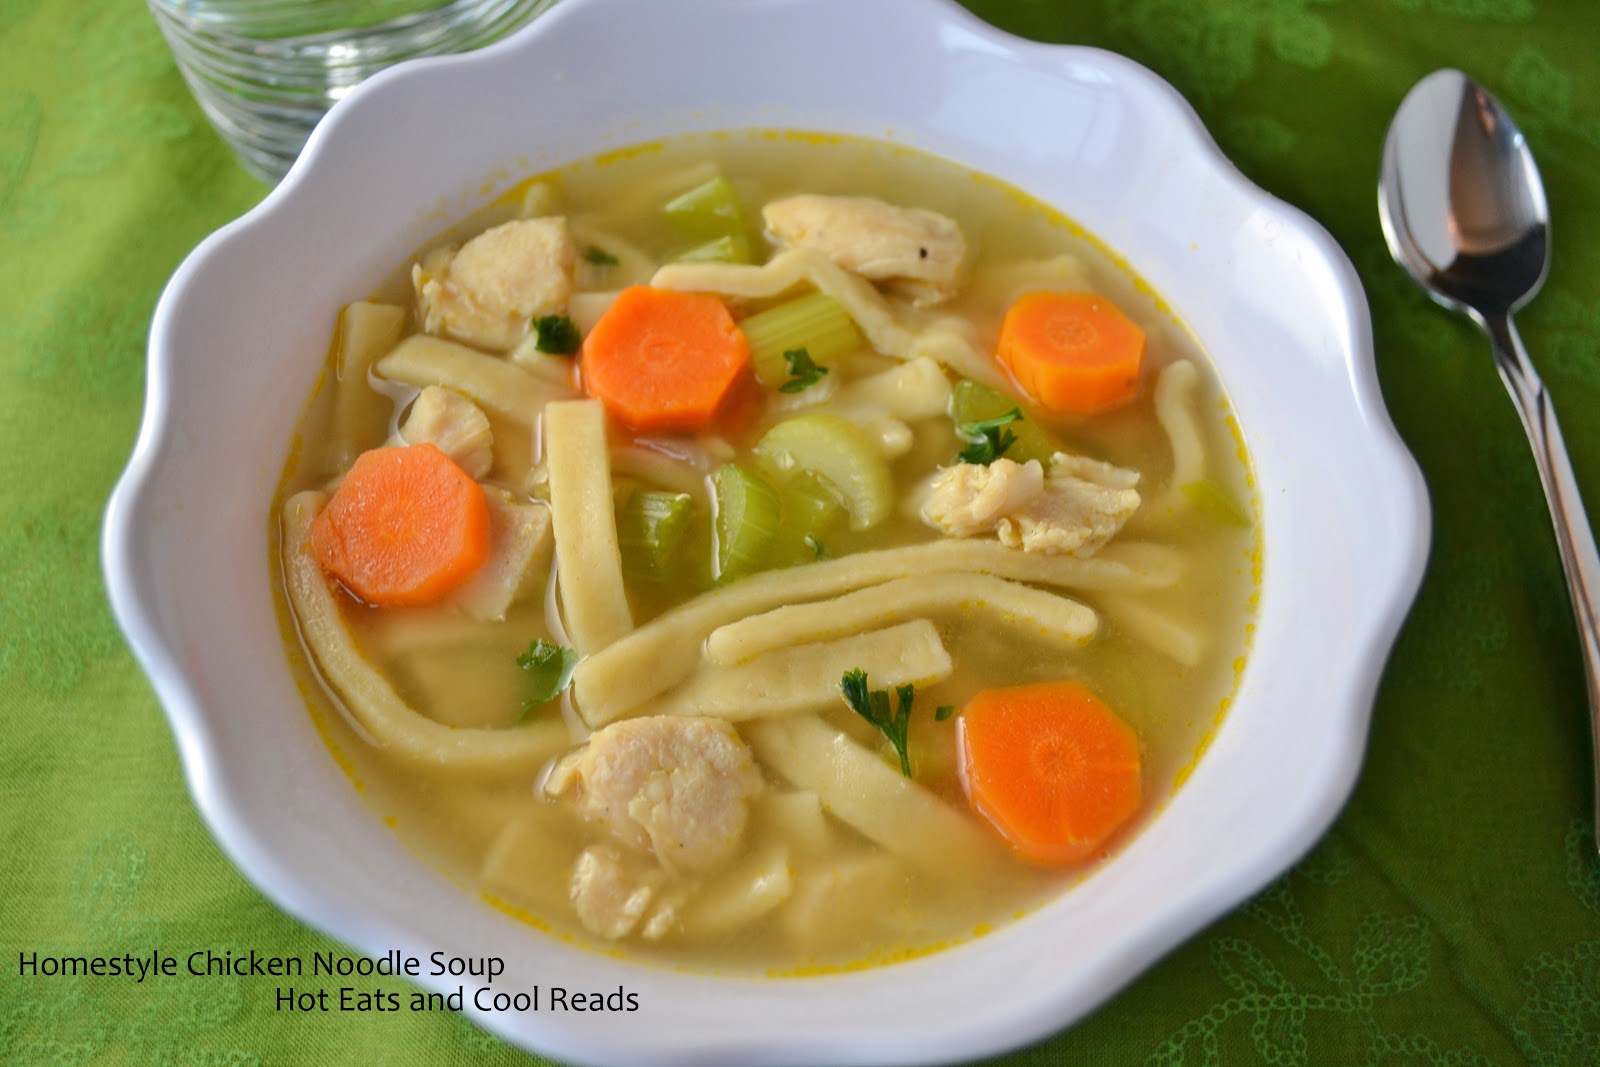 Easy Homemade Chicken Noodle Soup - COOKtheSTORY